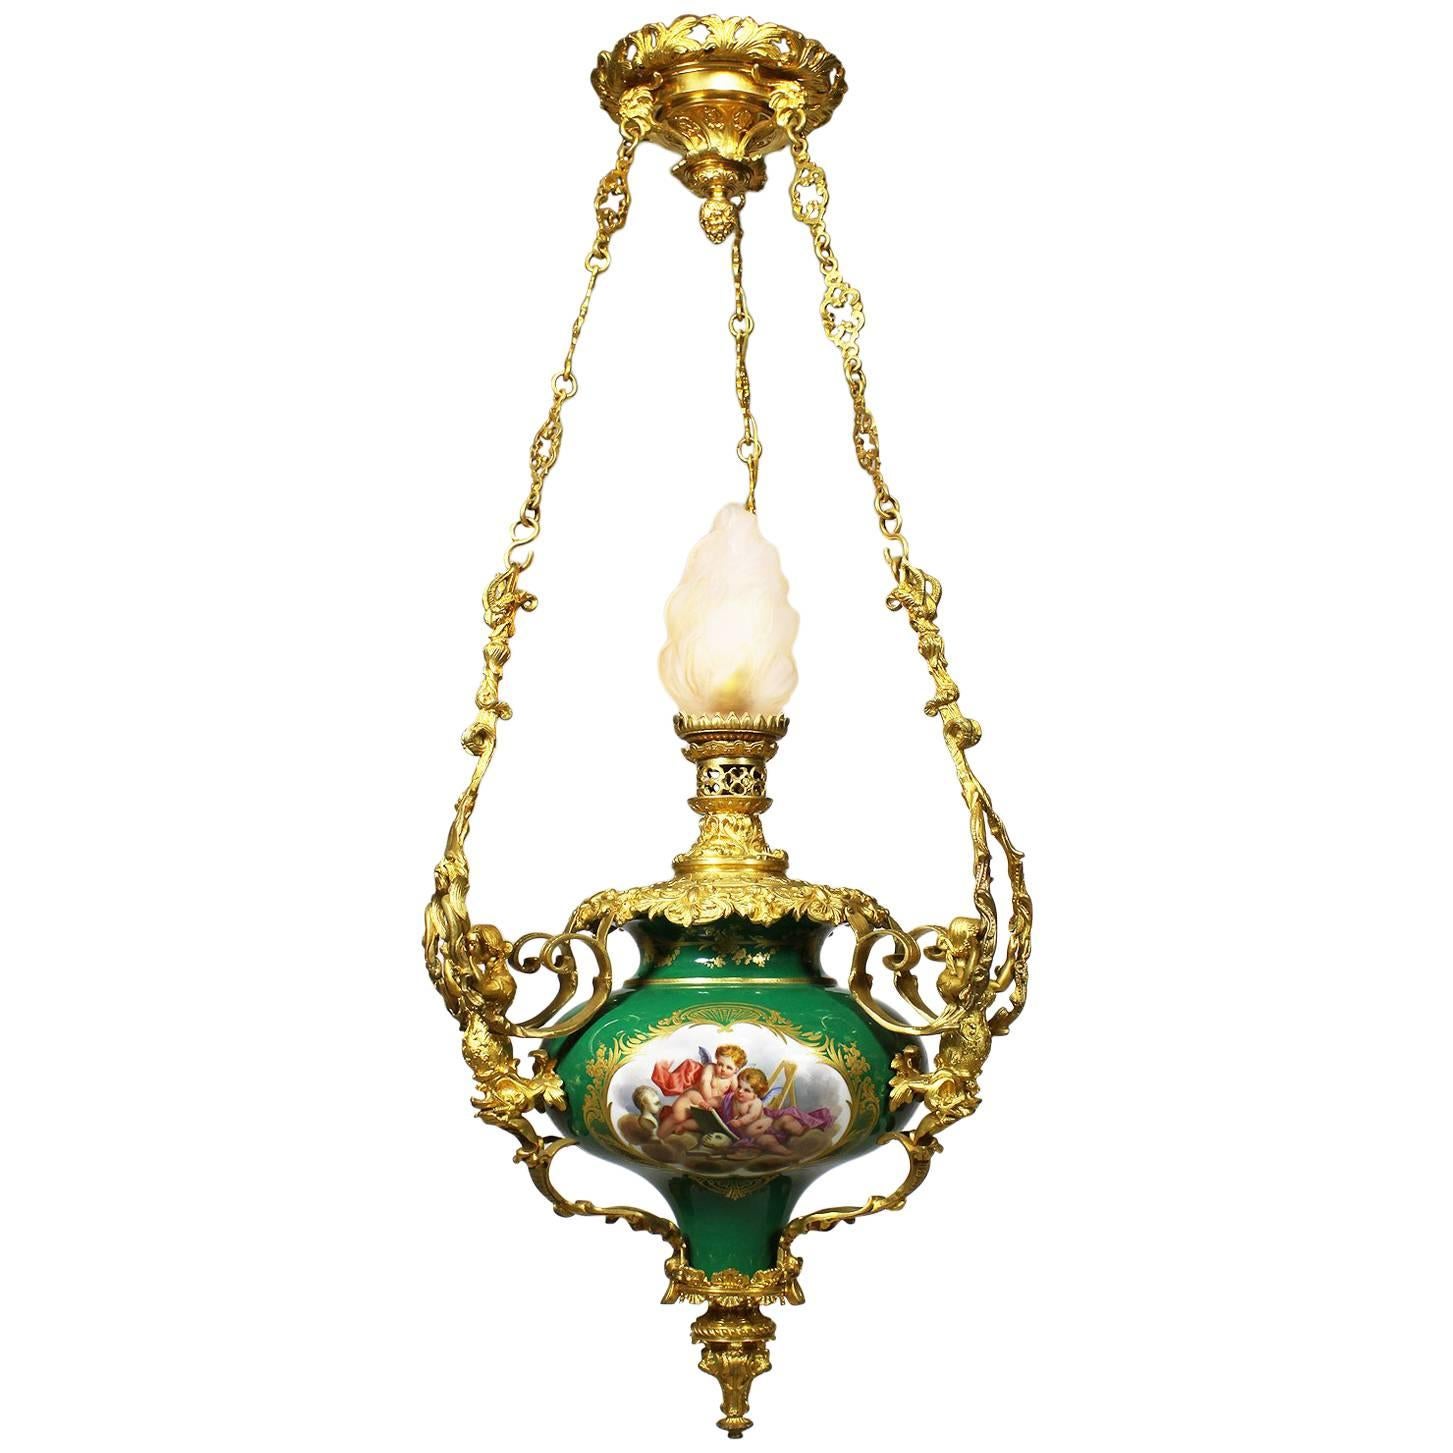 French 19th Century Figural Sevres Porcelain and Ormolu Mounted Hanging Lantern